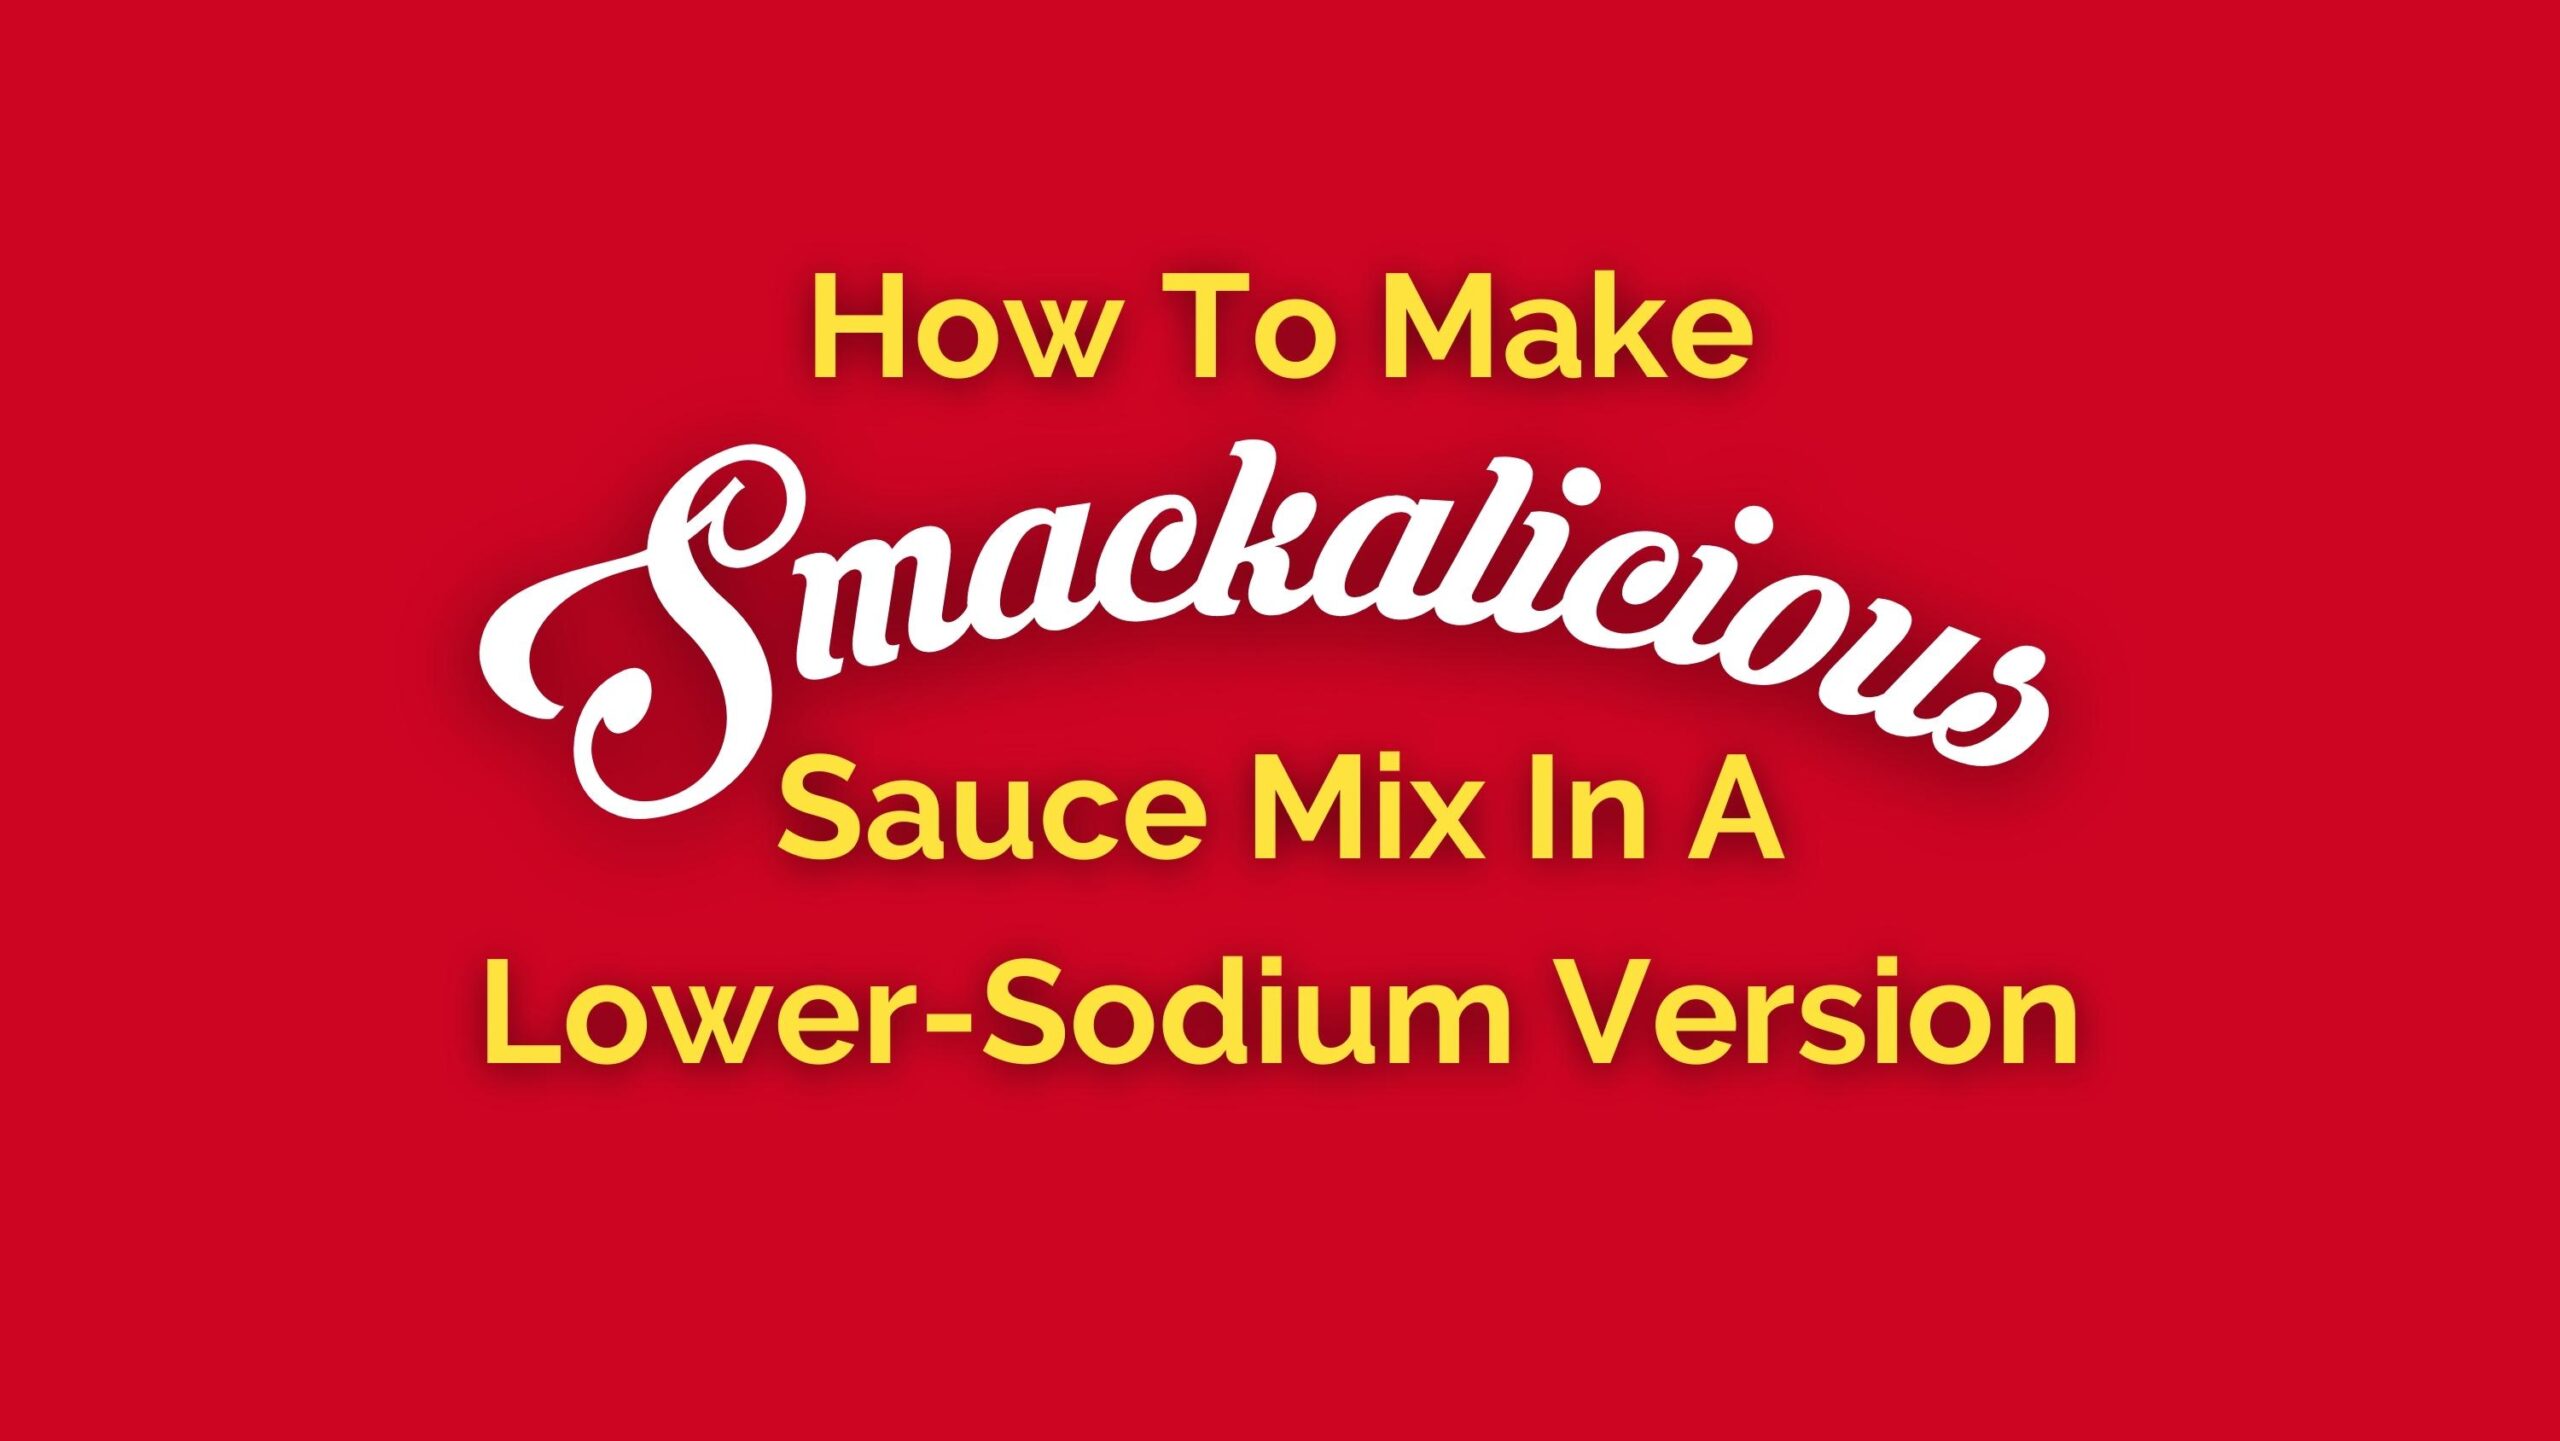 how to make bloveslife smackalicious Sauce Mix In A Lower-Sodium Version